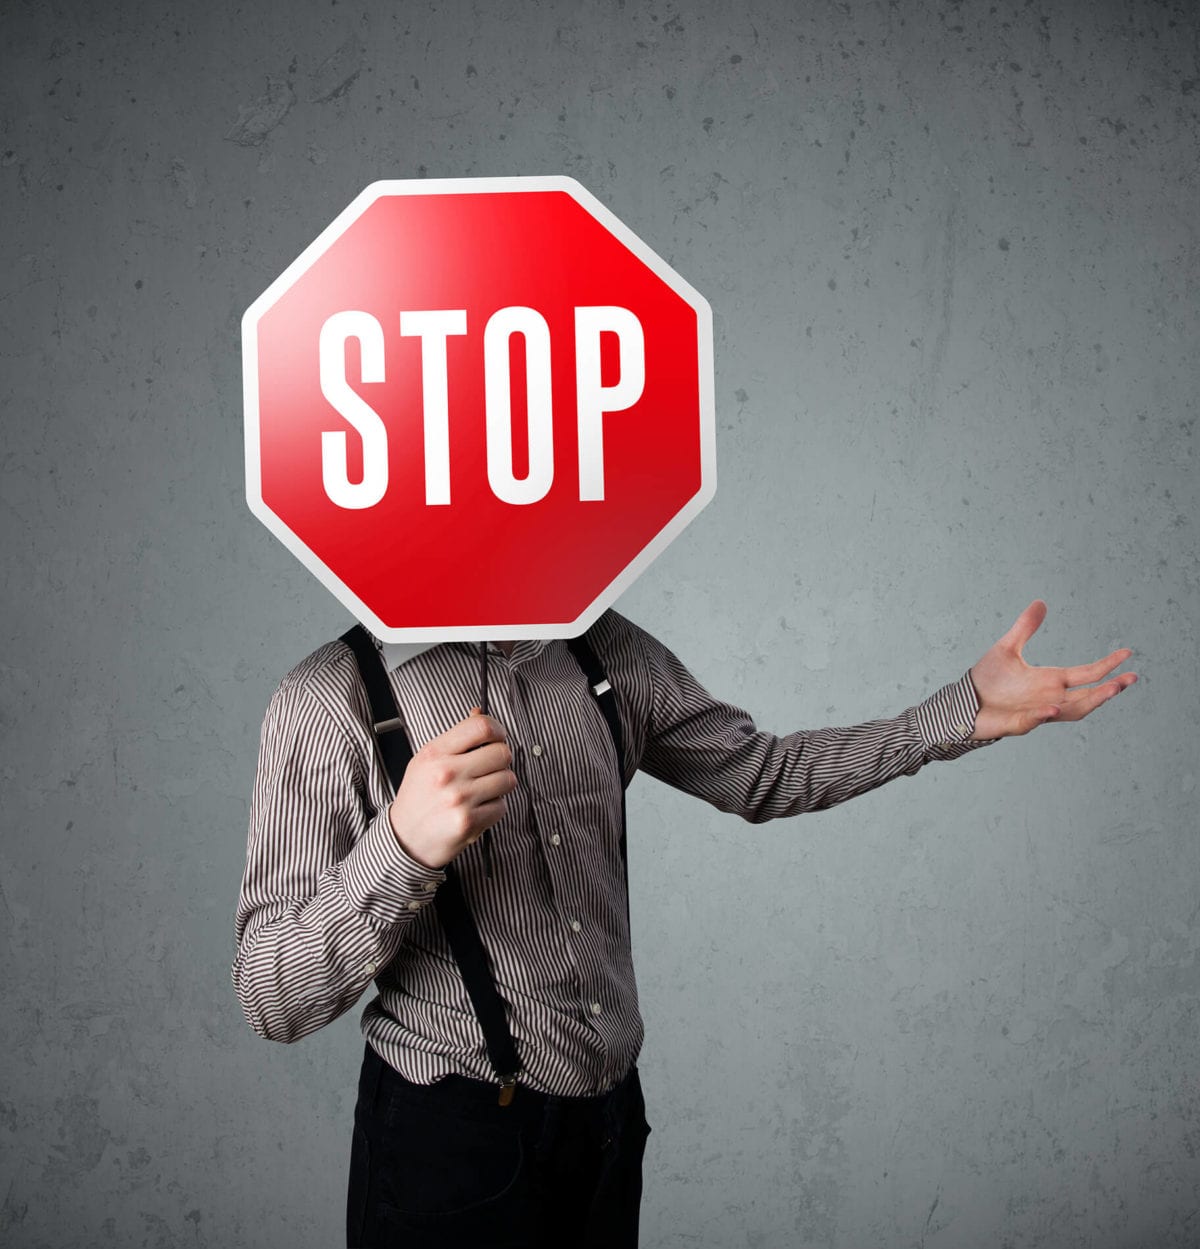 A man holds a stop sign in front of his face